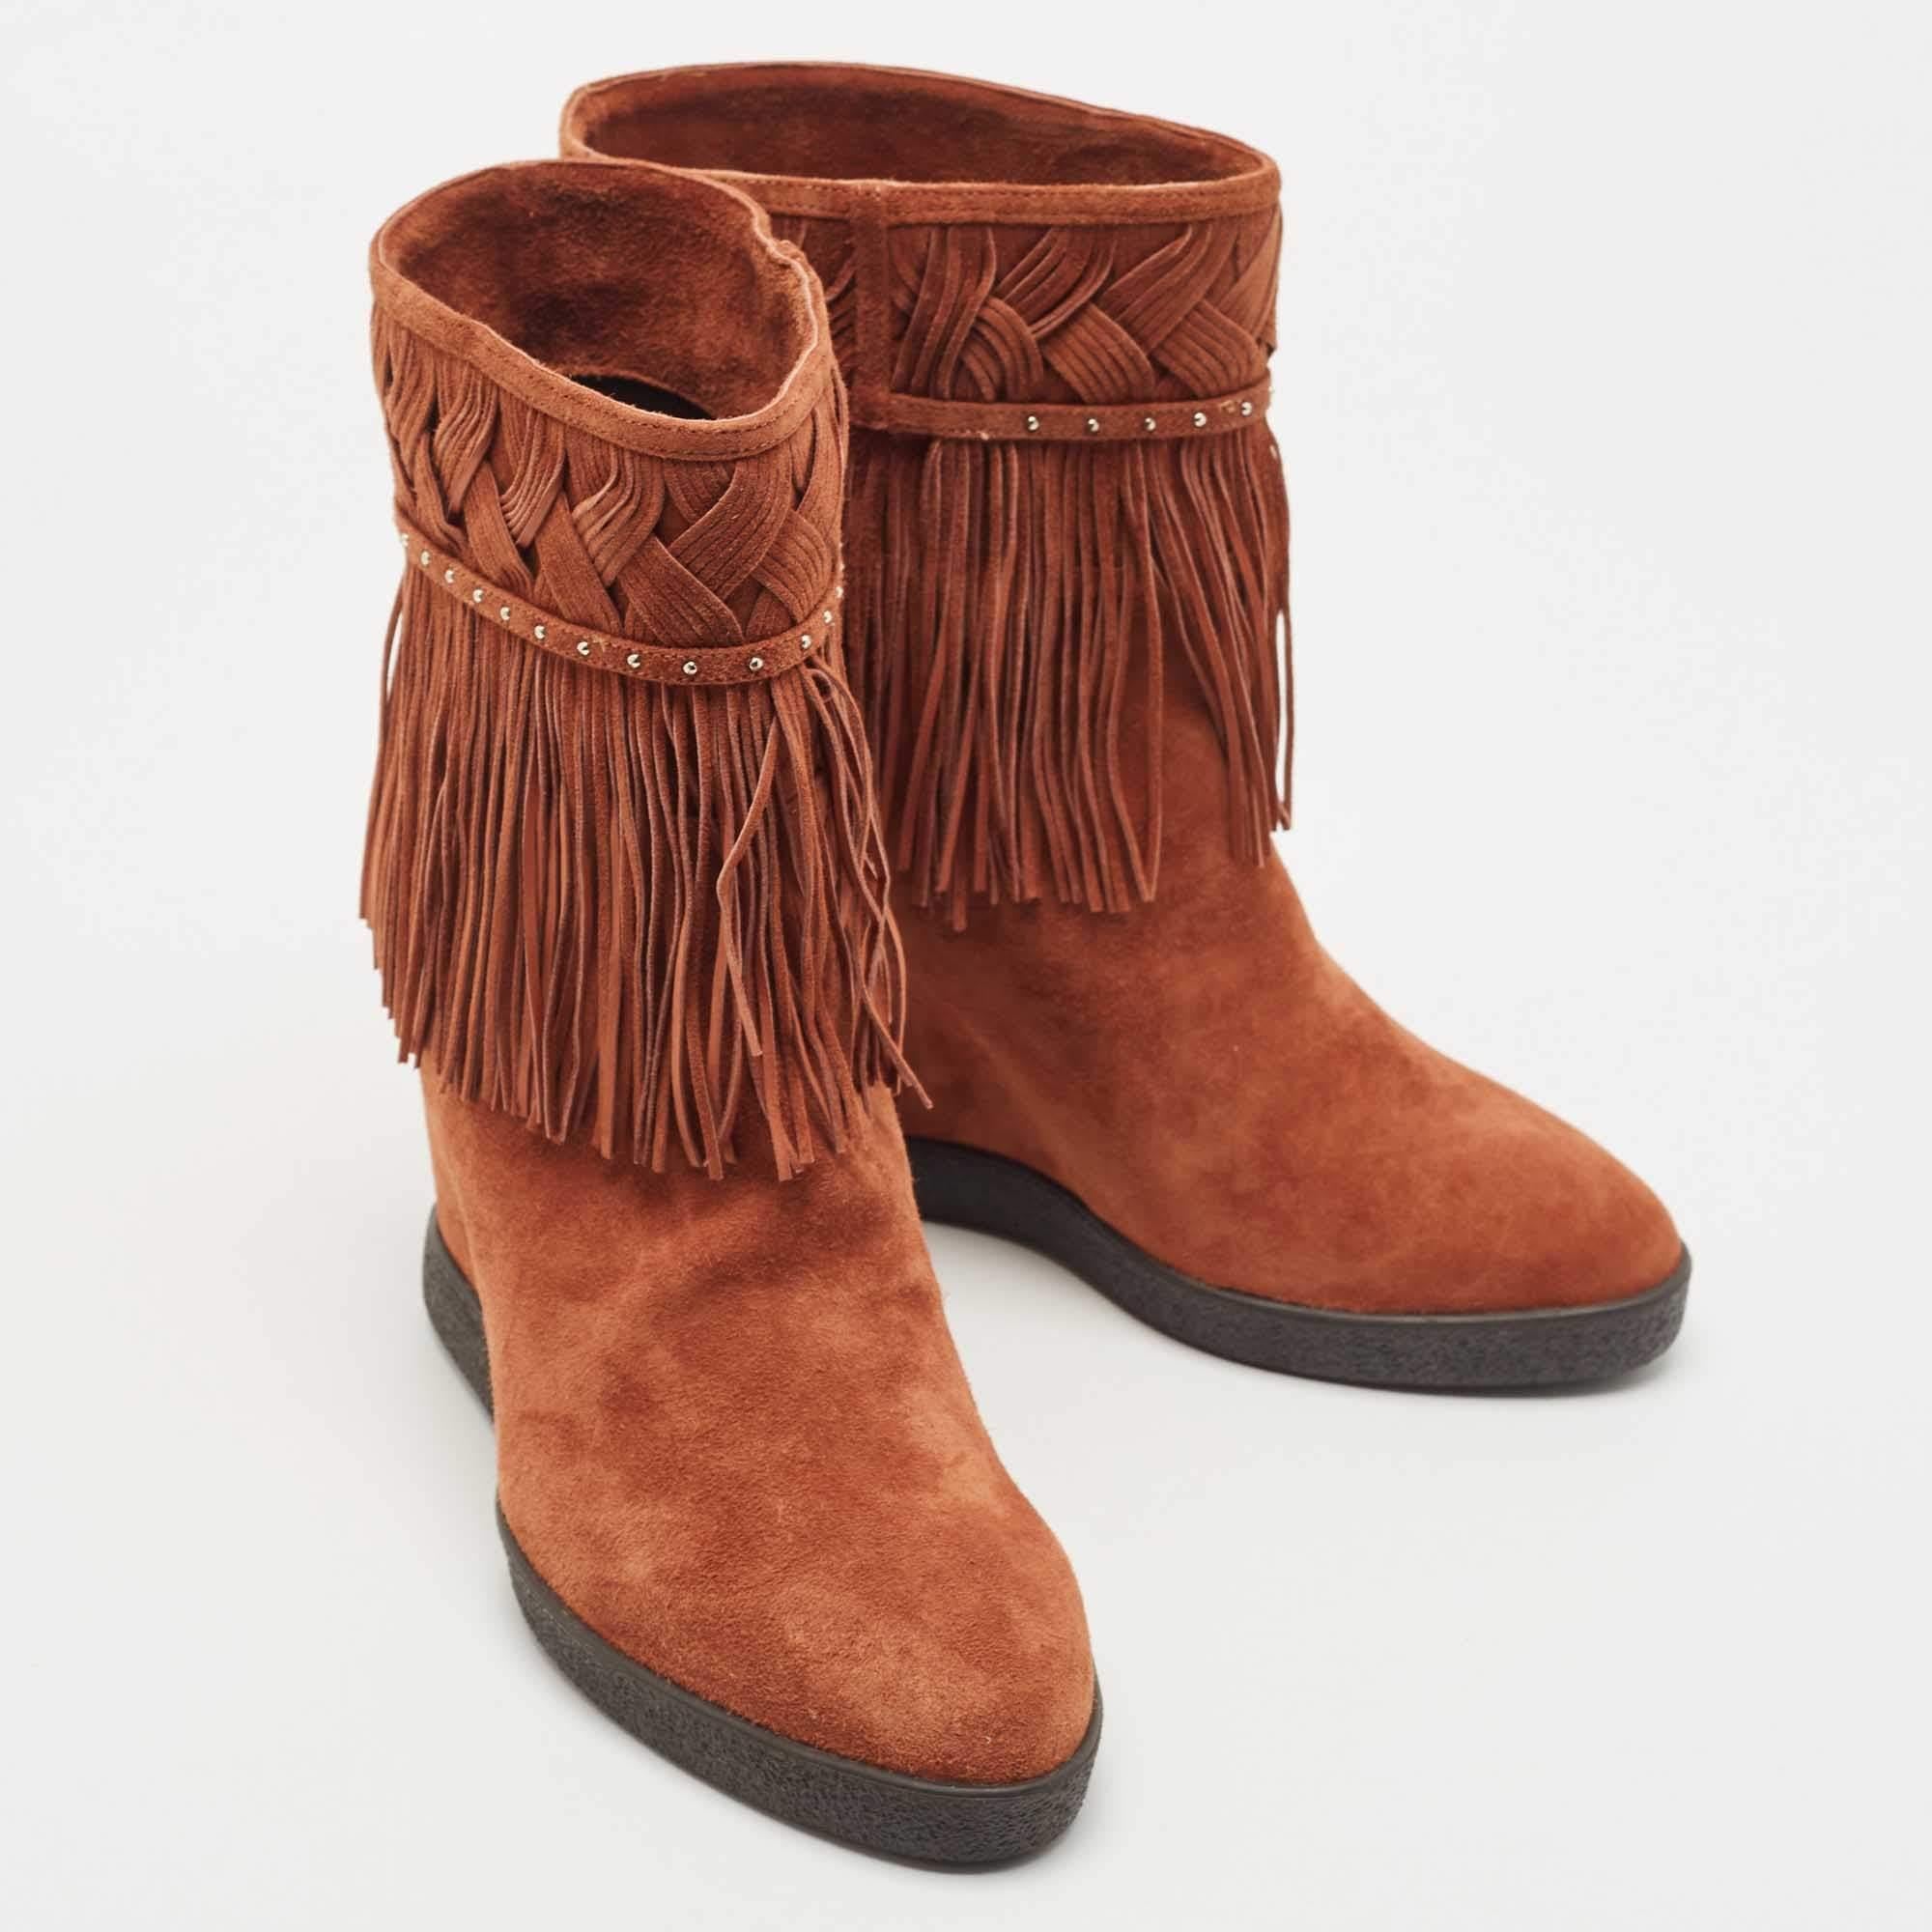 Le Silla Brown Suede Fringe Ankle Length Boots Size 38.5 1